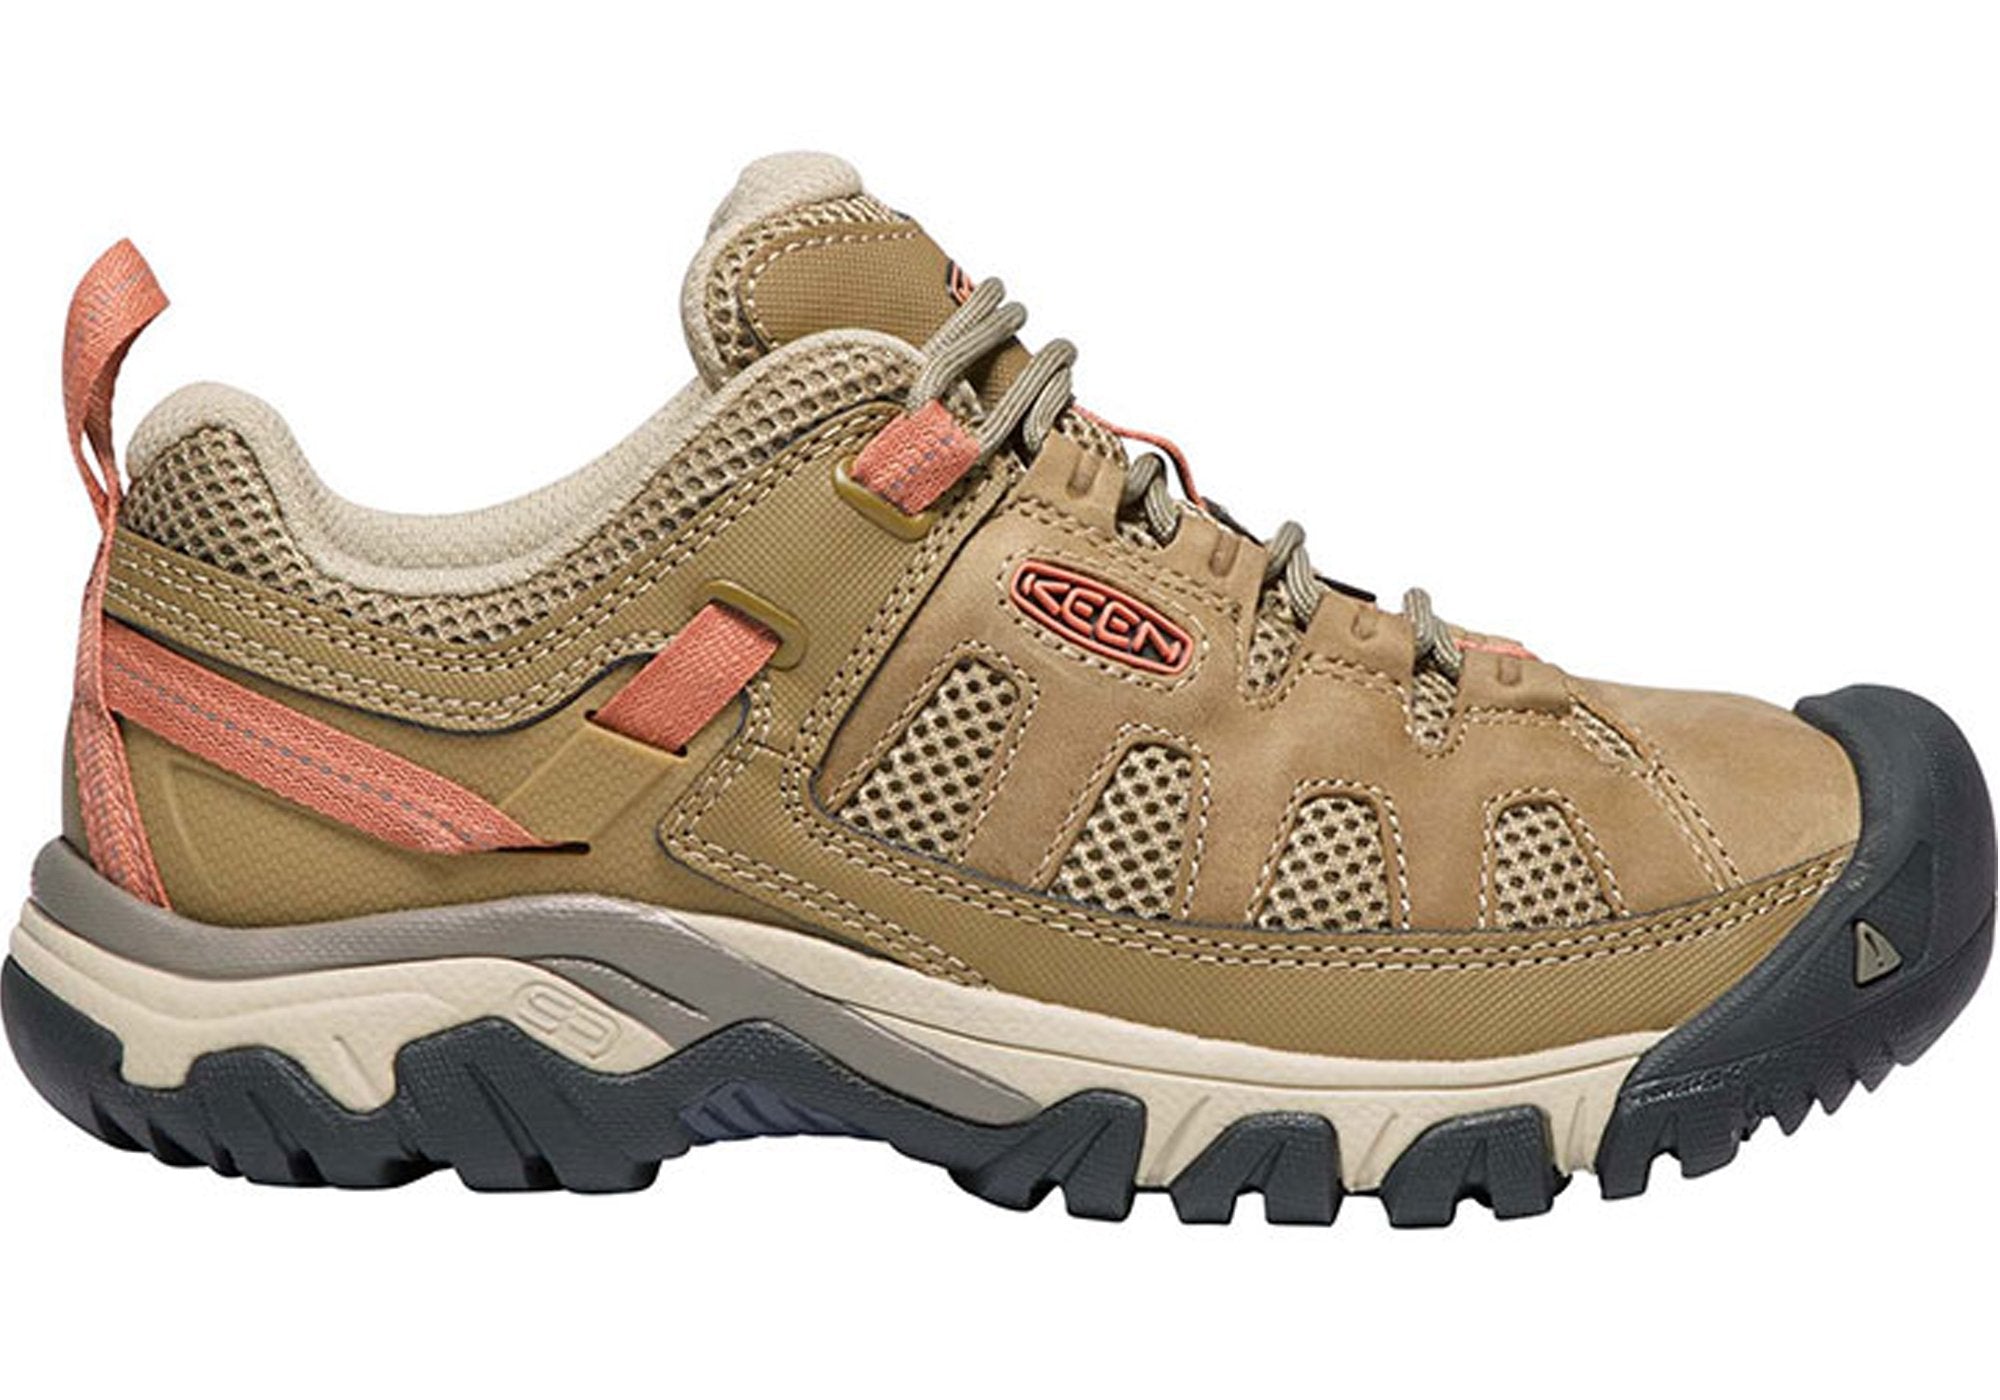 Keen Vent Womens Comfortable Durable Waterproof Hiking Shoes | Brand ...